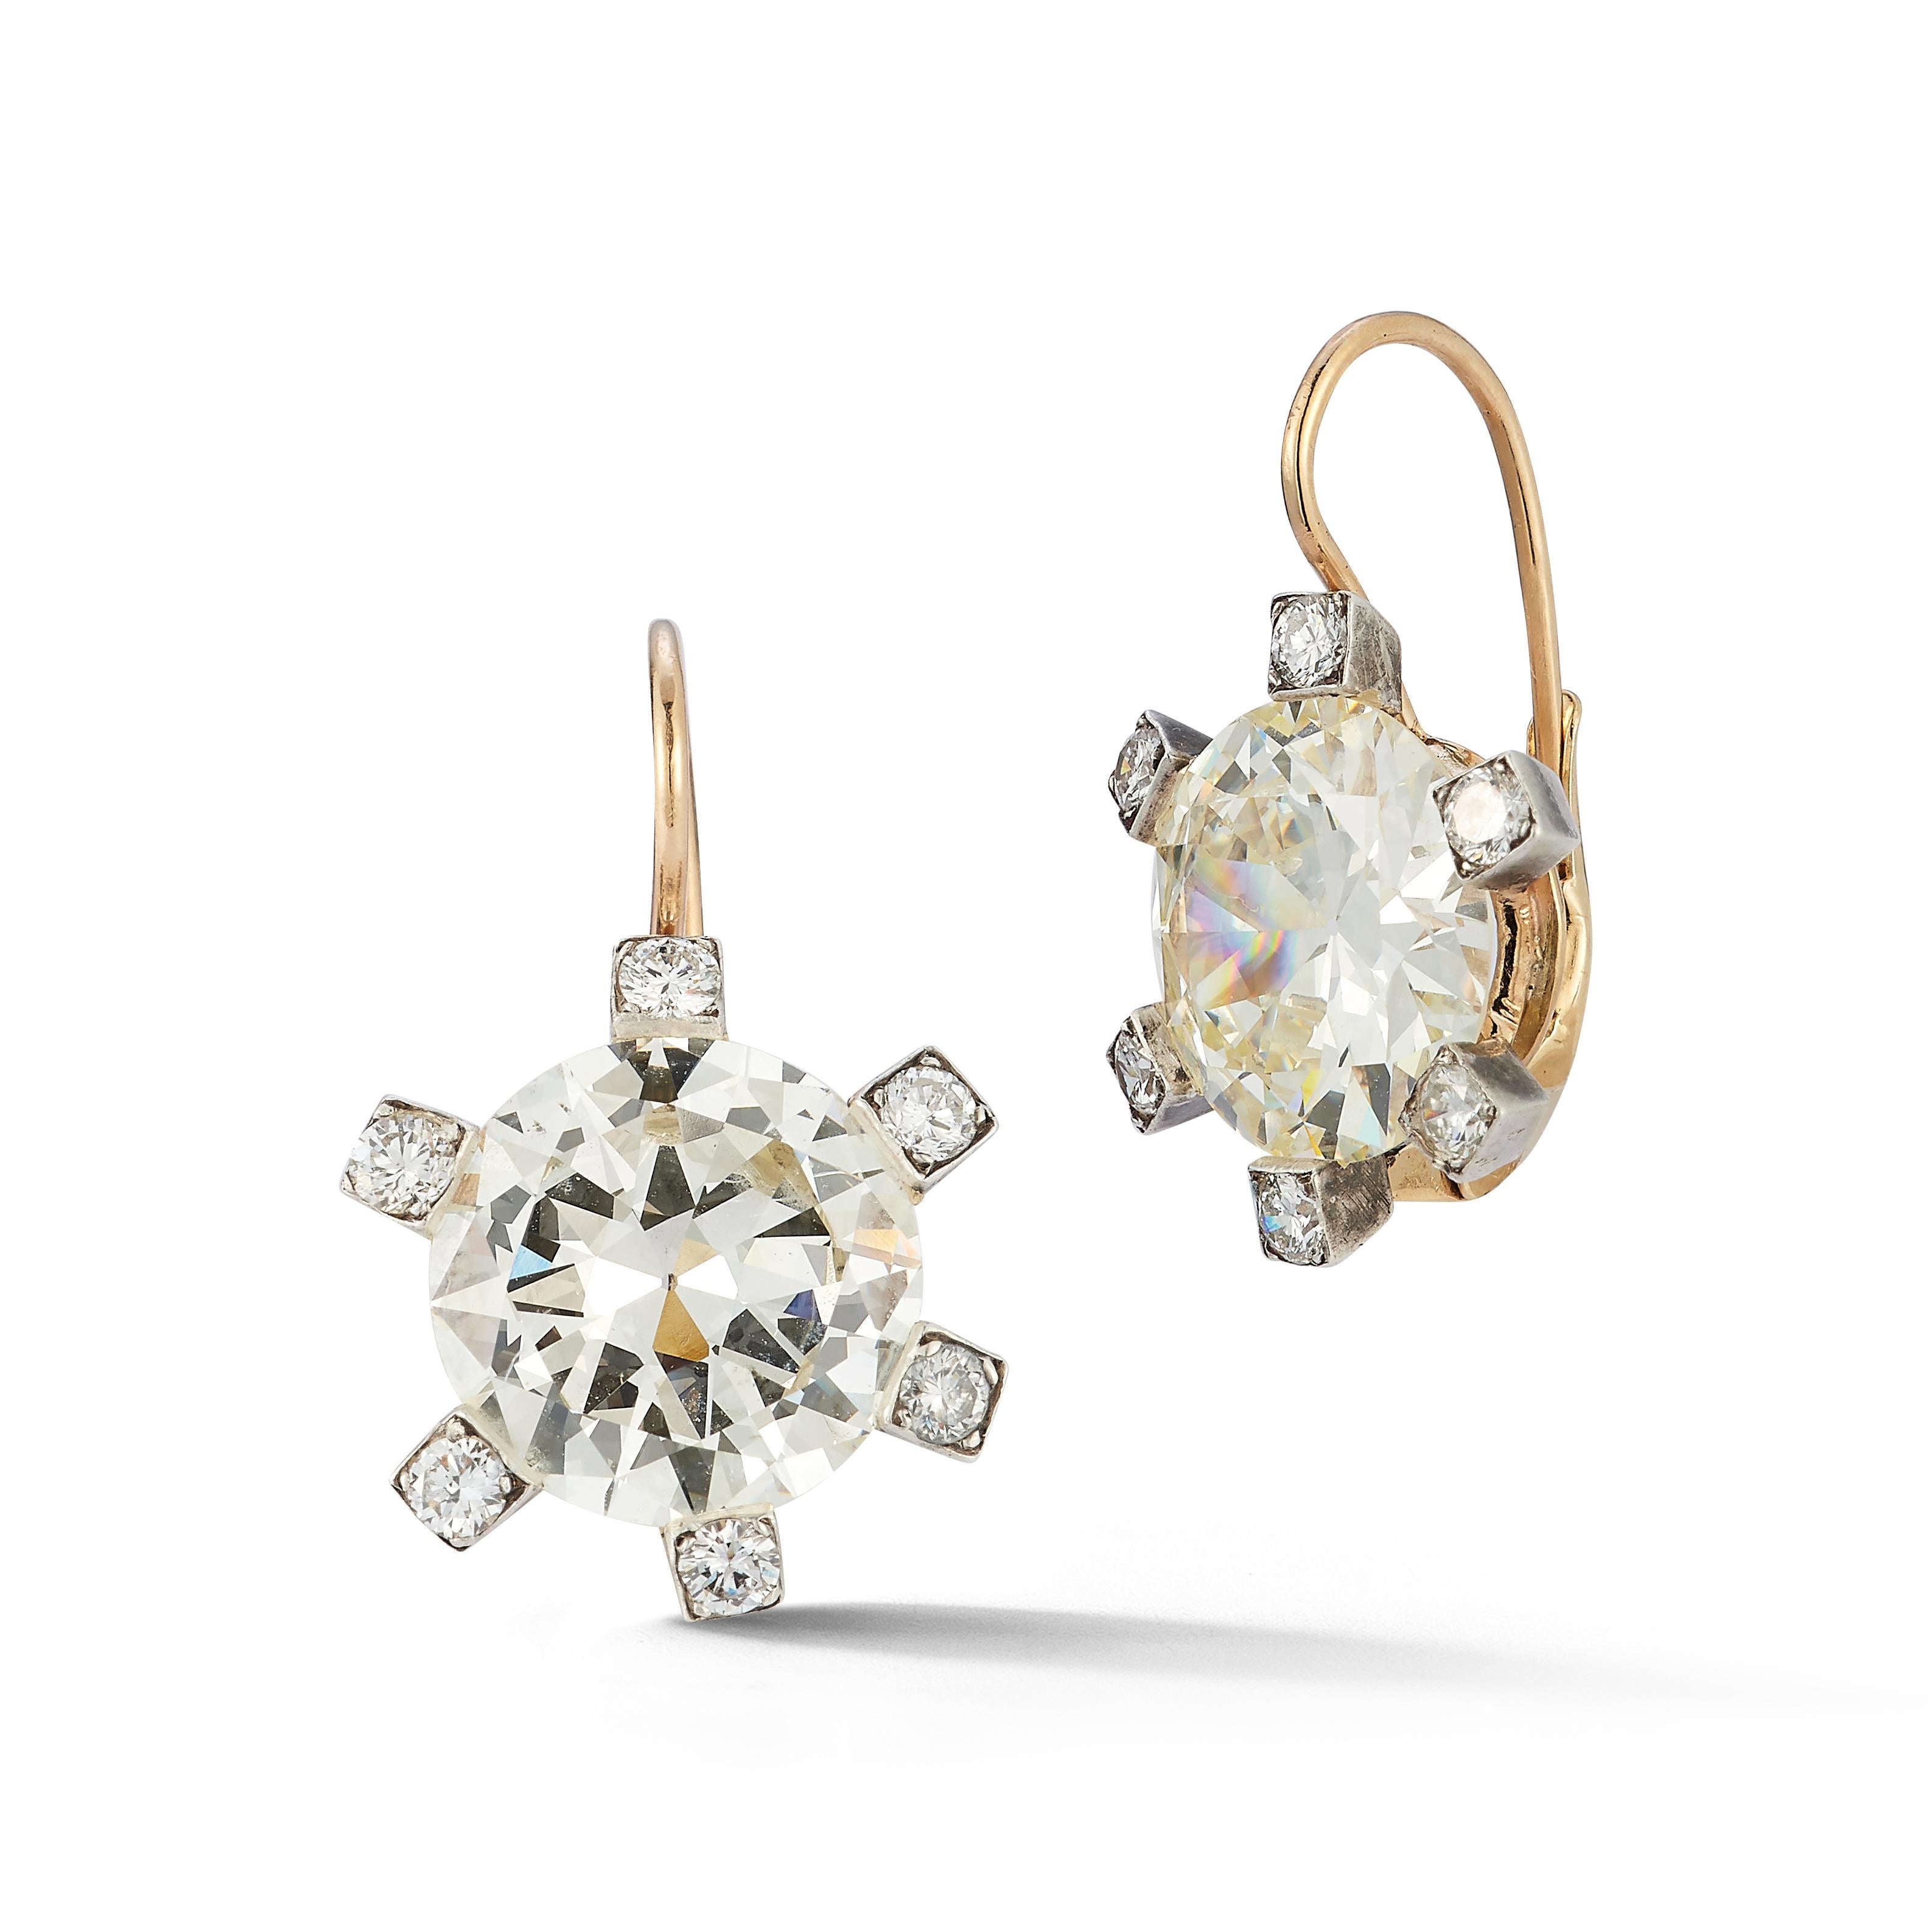 Antique Diamond Earrings

Accompanied by 2 GIA certificates 

GIA Diamond Info: 
5.59 carats color grade L clarity grade VS2
5.70 carats color grade N clarity grade VS2

Each diamond surrounded by 6 smaller round cut diamonds
Length: 1